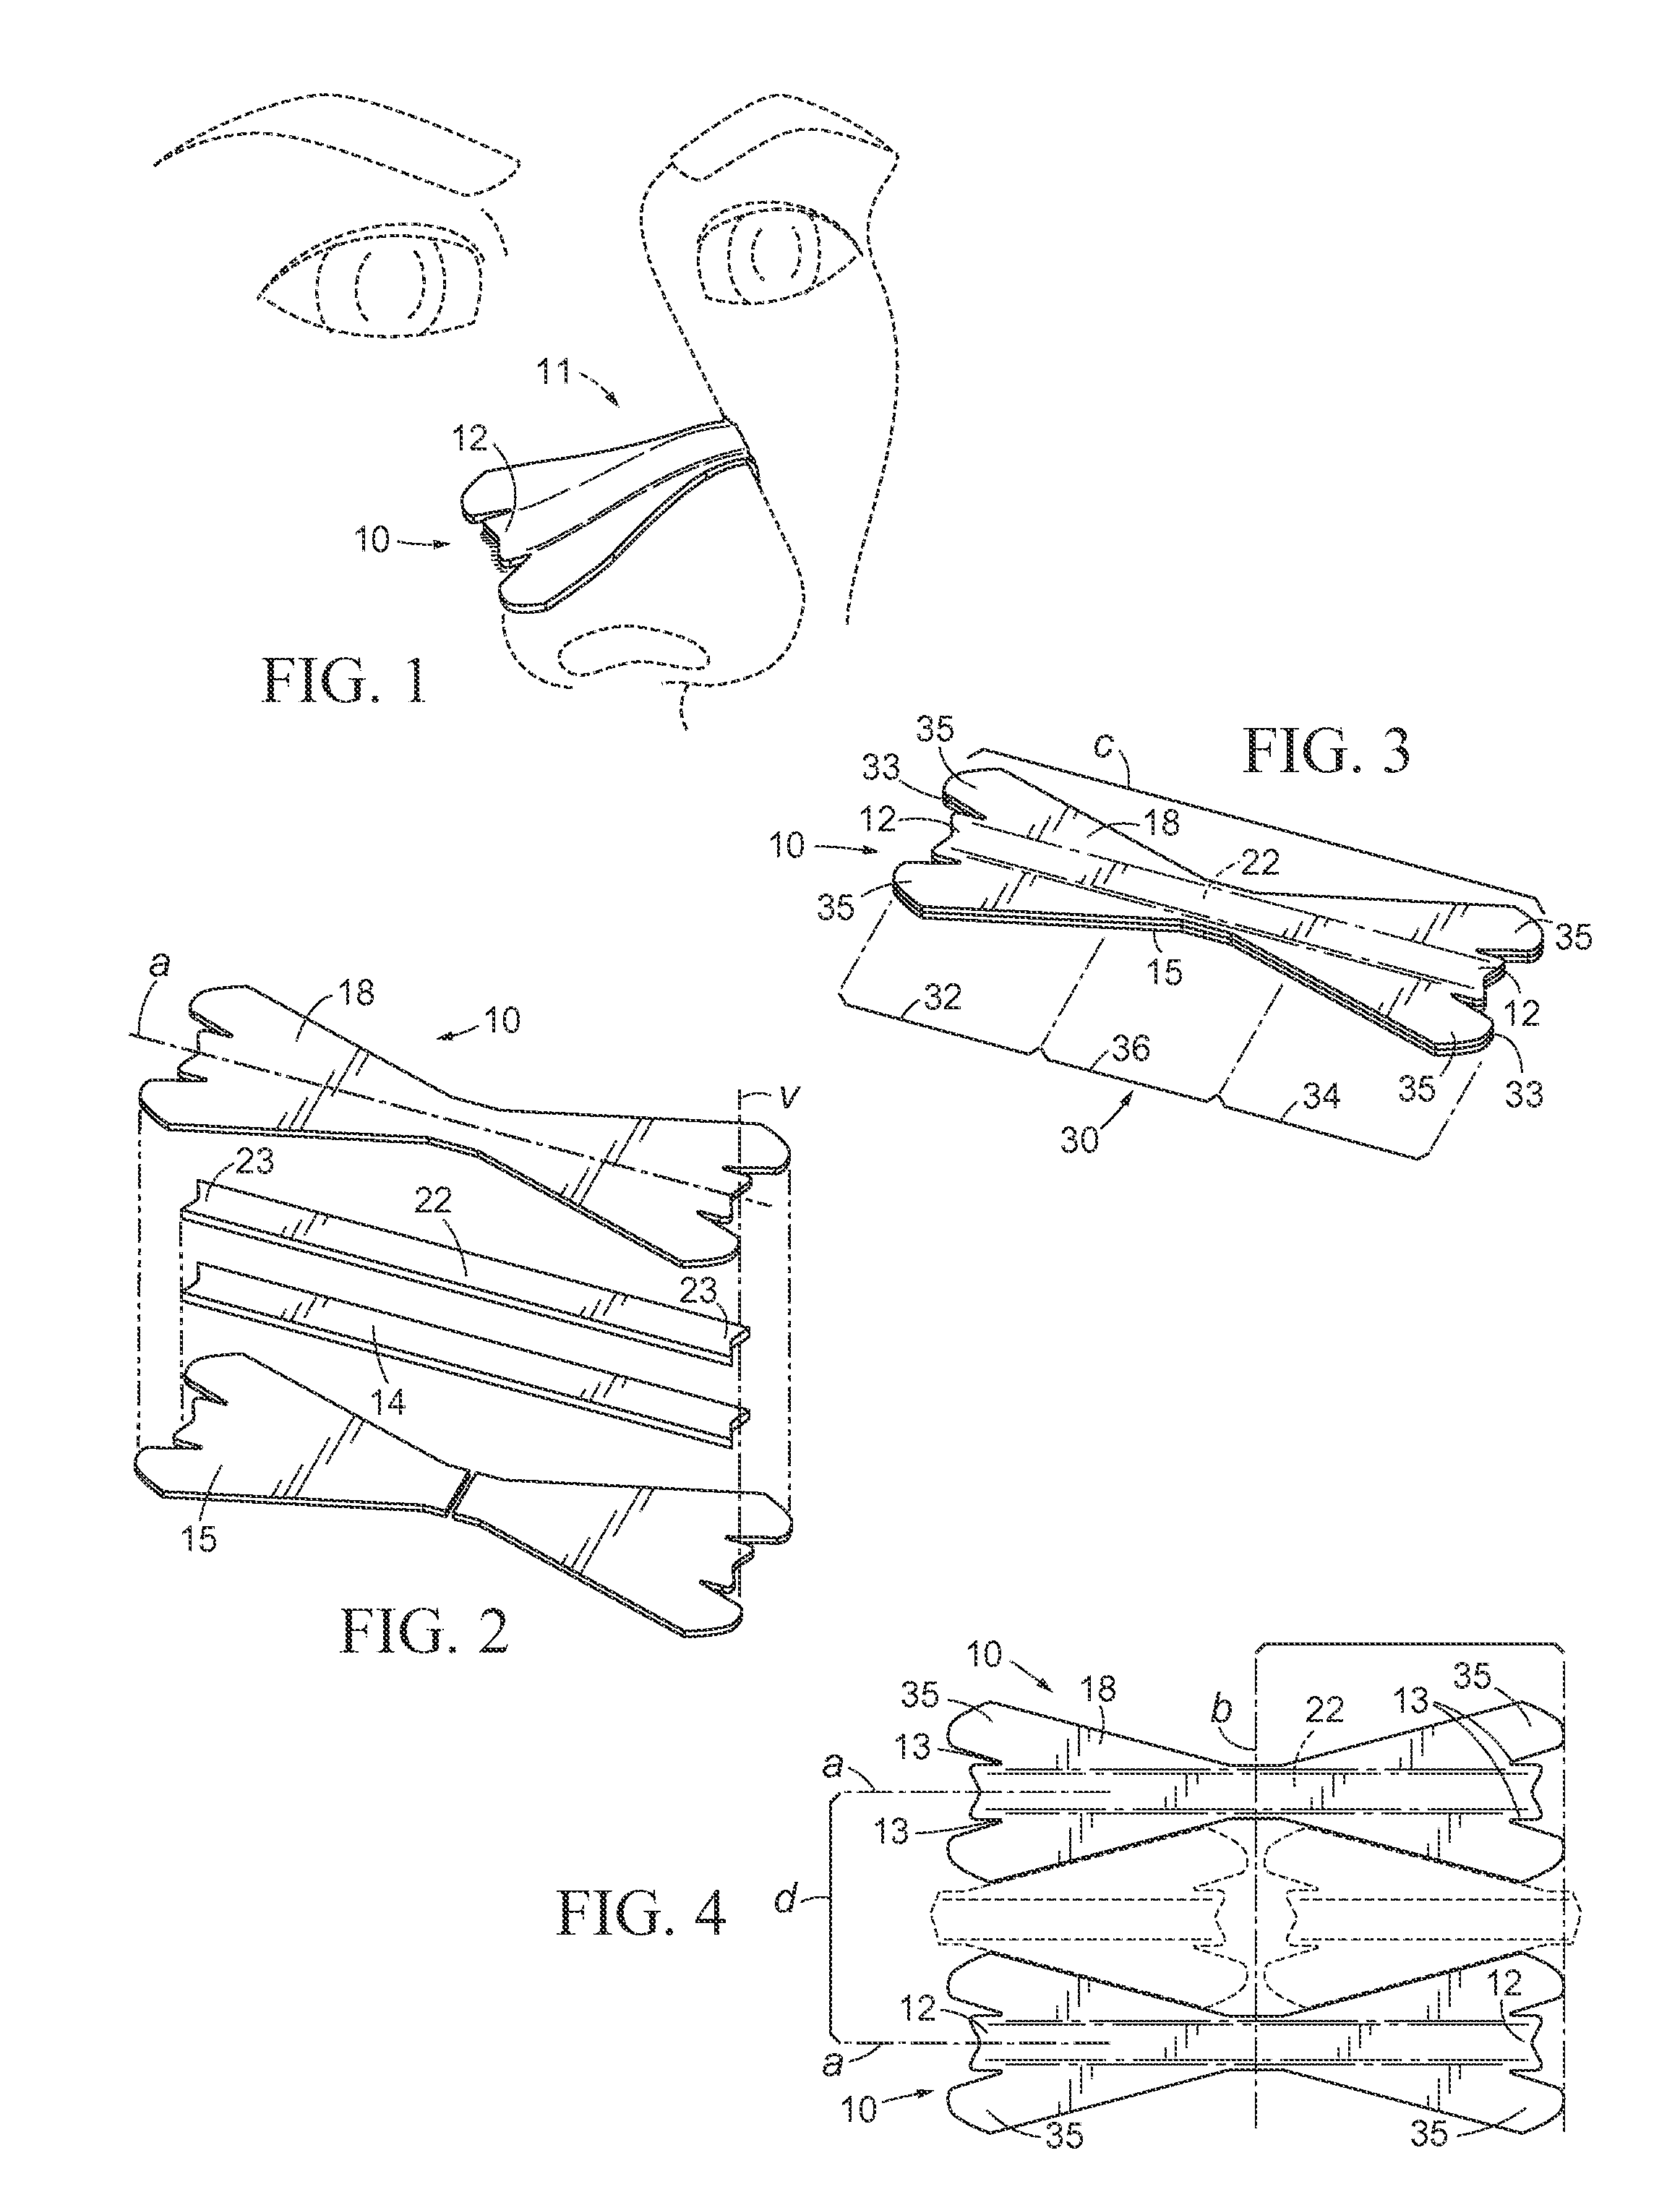 Nasal dilator and methods of fabricating medical devices